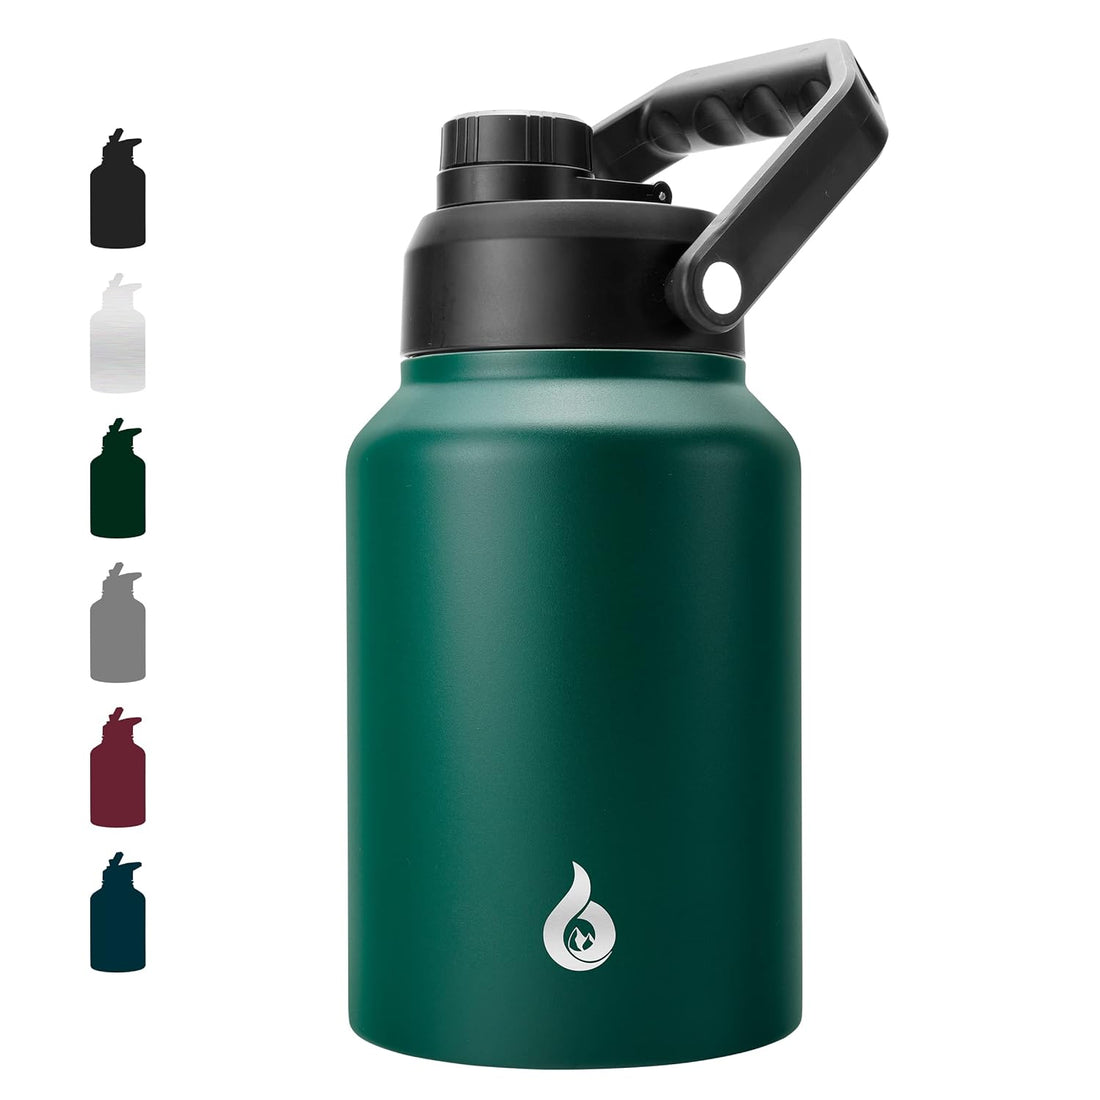 BJPKPK 64oz Insulated Water Bottle, Half Gallon Water Bottle with Large Handle, BPA Free Leak Proof Flask for Sports, Big Stainless Steel Water Bottle with Anti-slip Bottom, Army Green